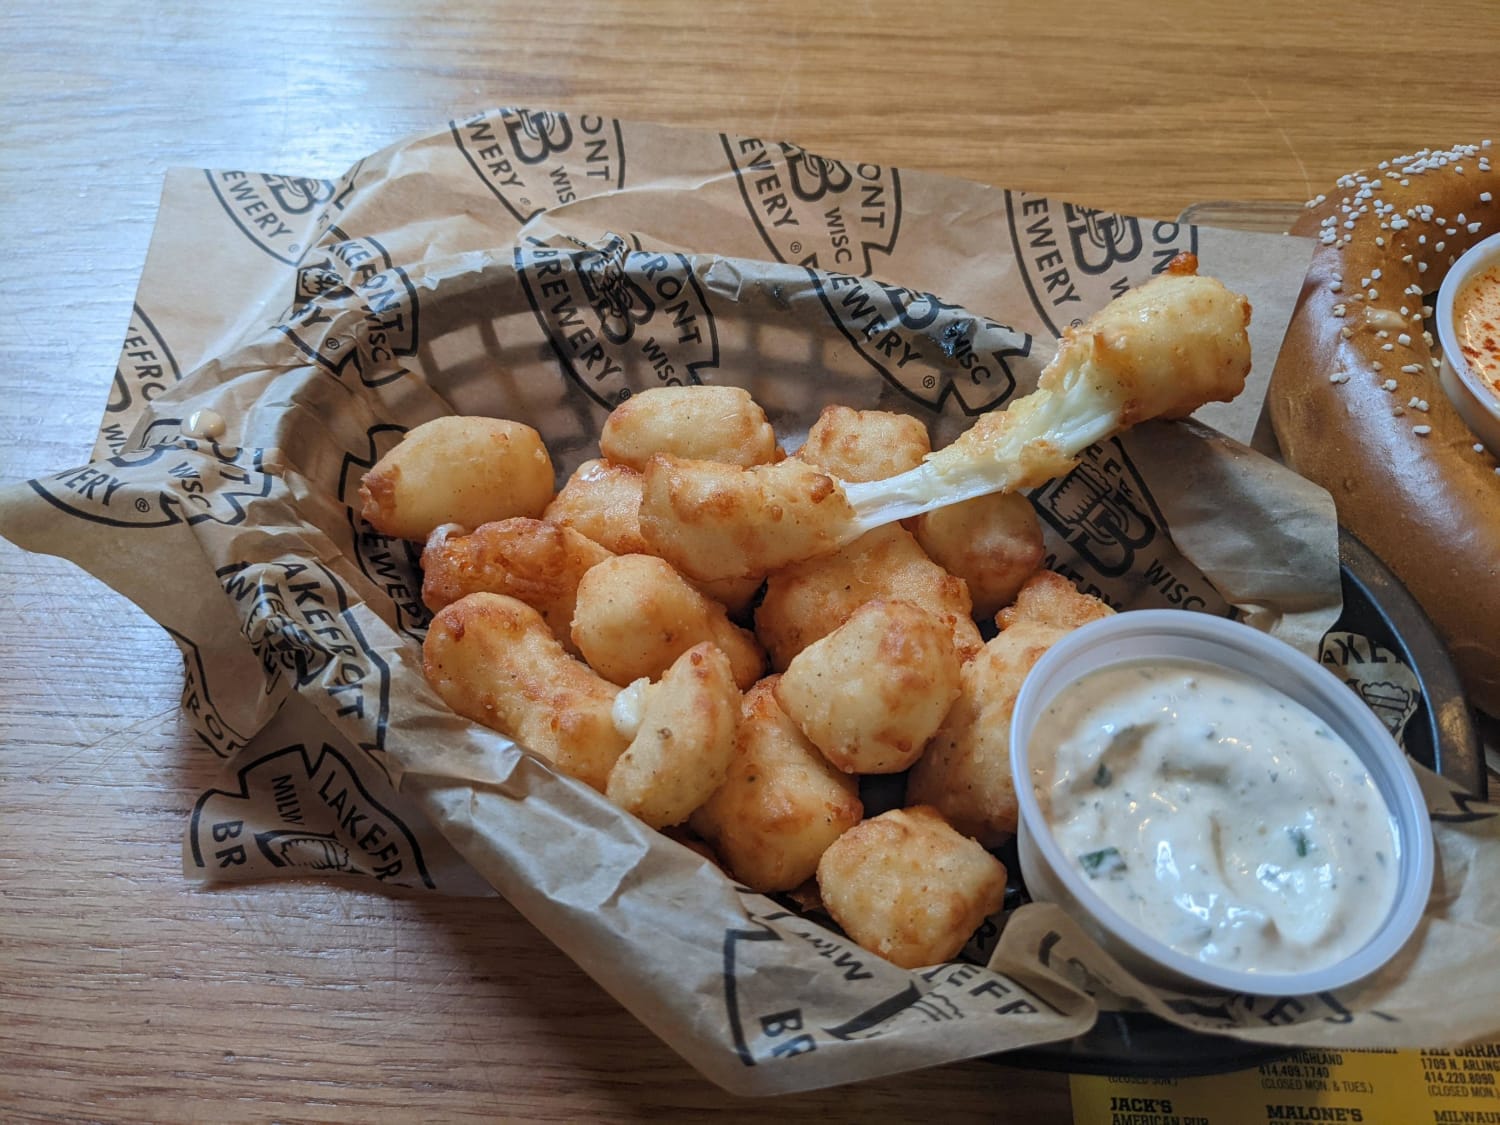 First time trying Wisconsin's famous cheese curds - Lakefront Brewery in Milwaukee, WI